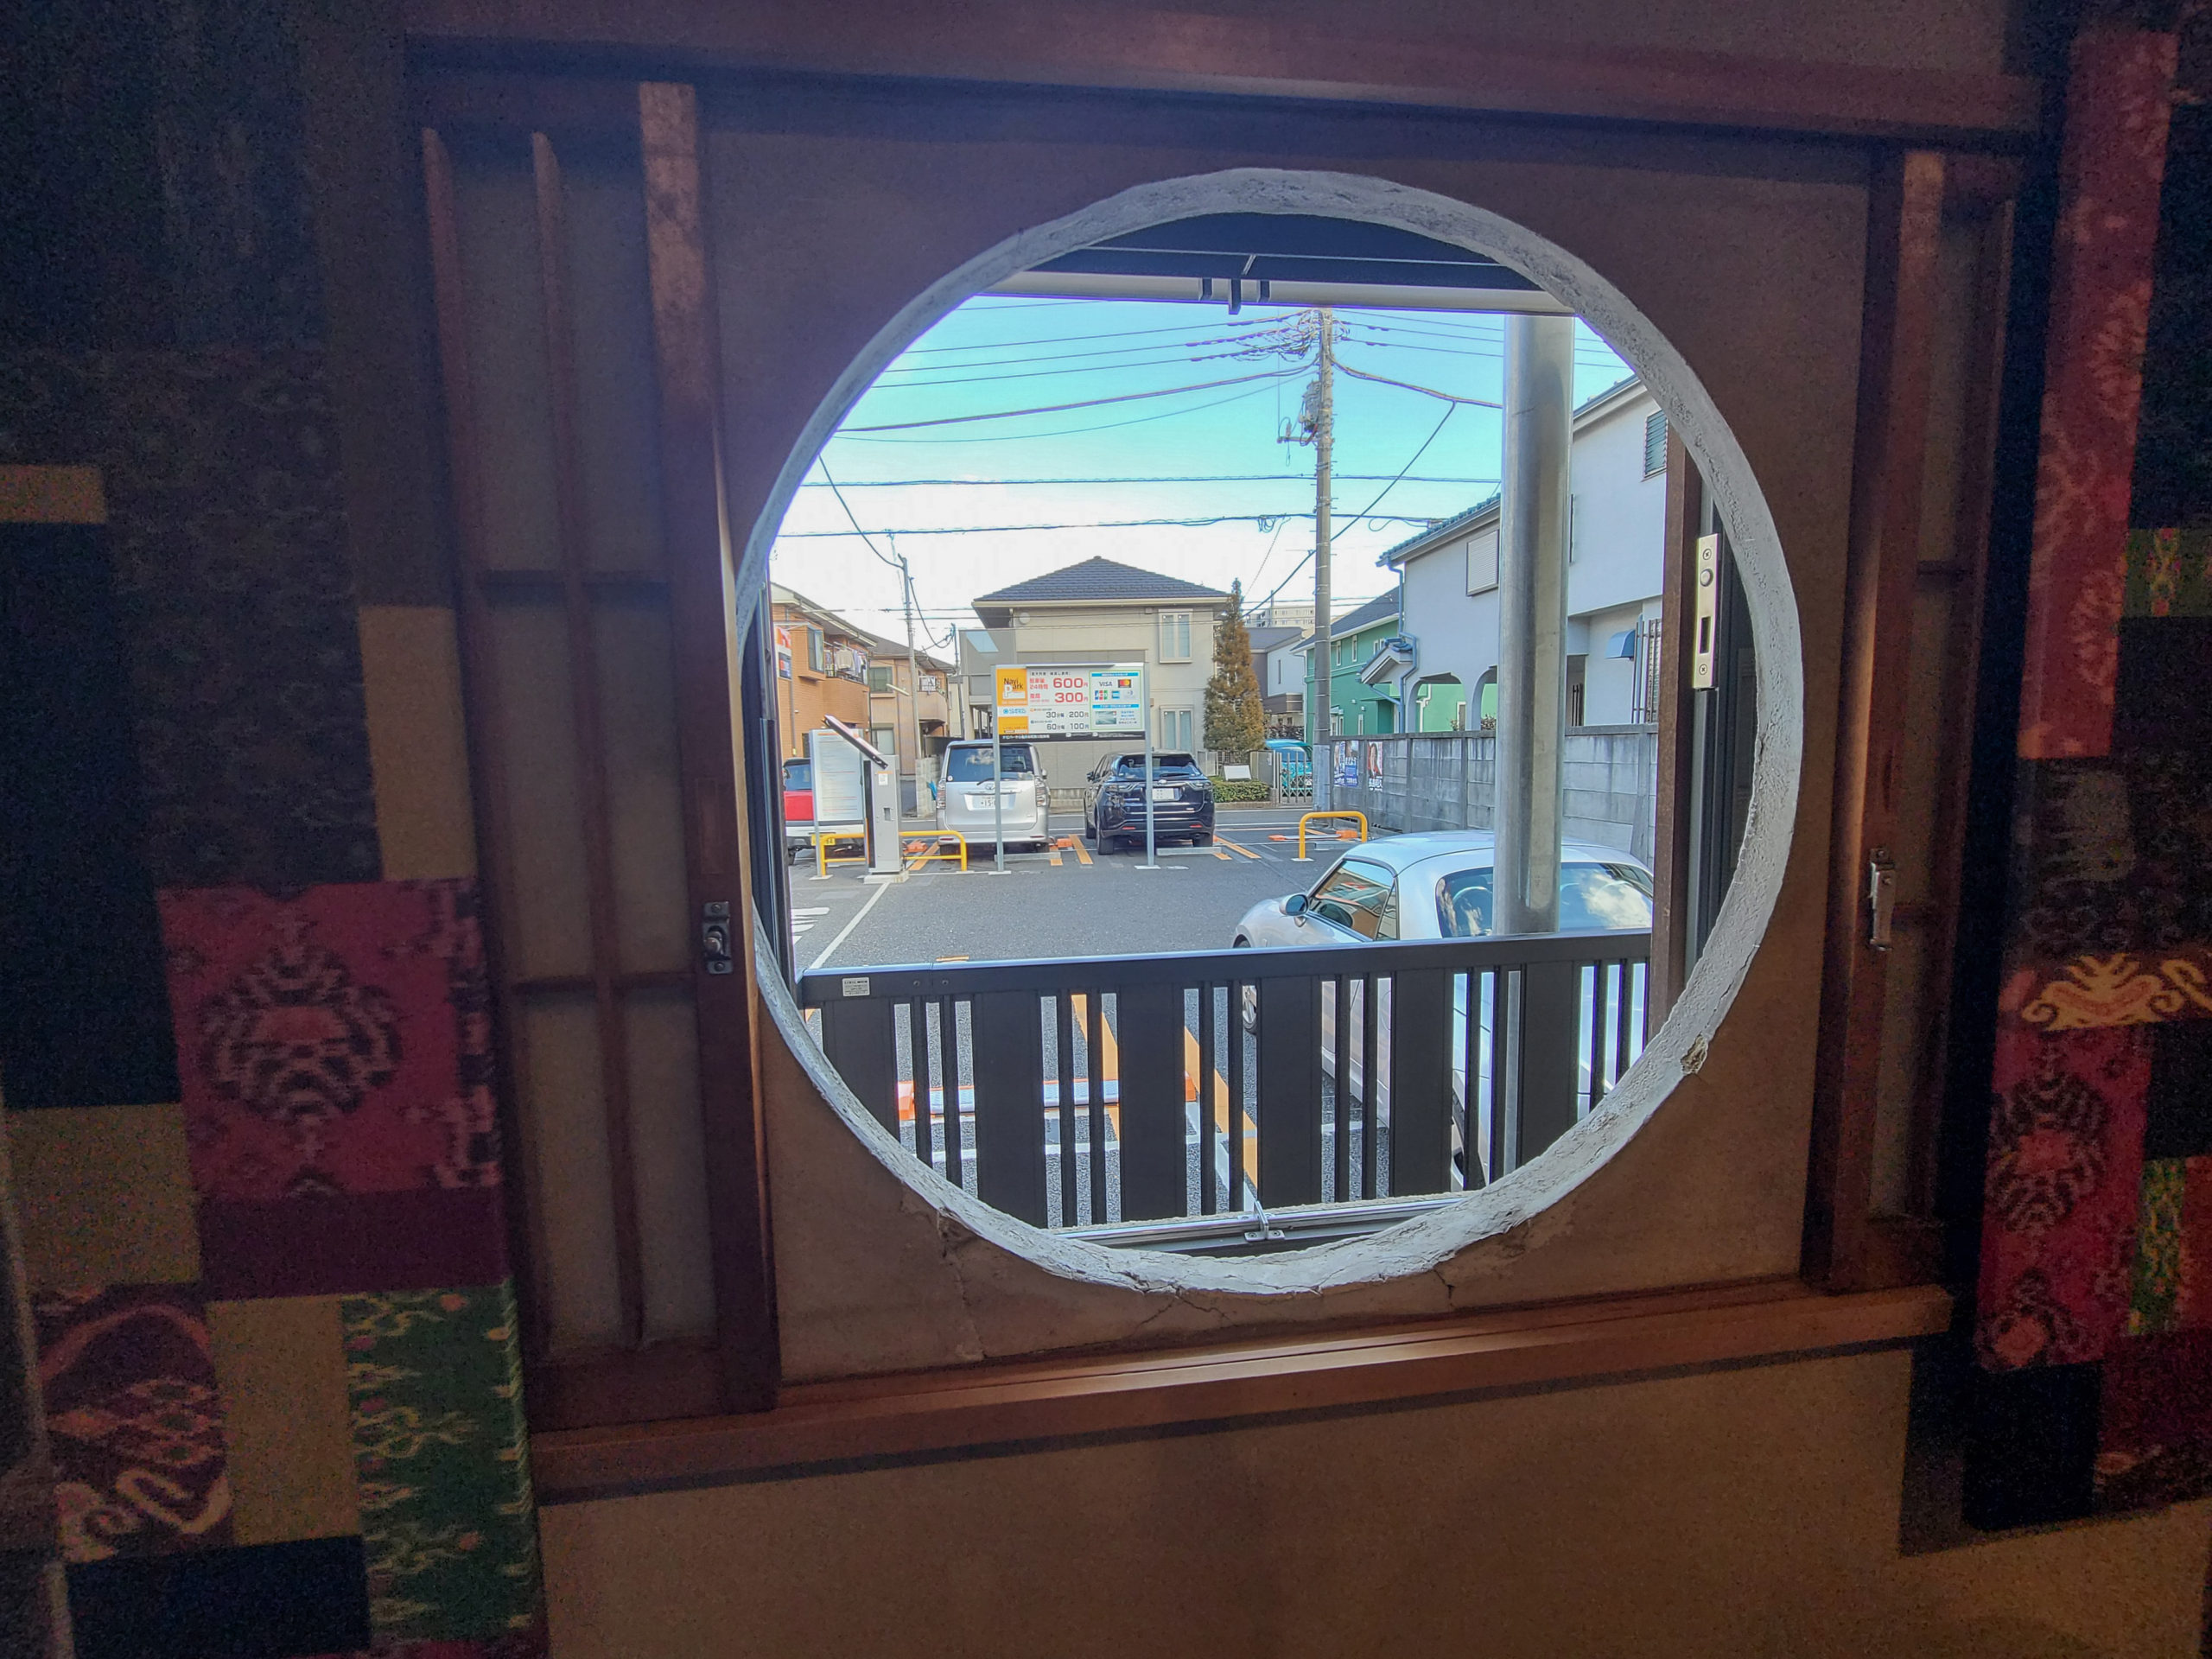 A round window still remains from the original ryokan building